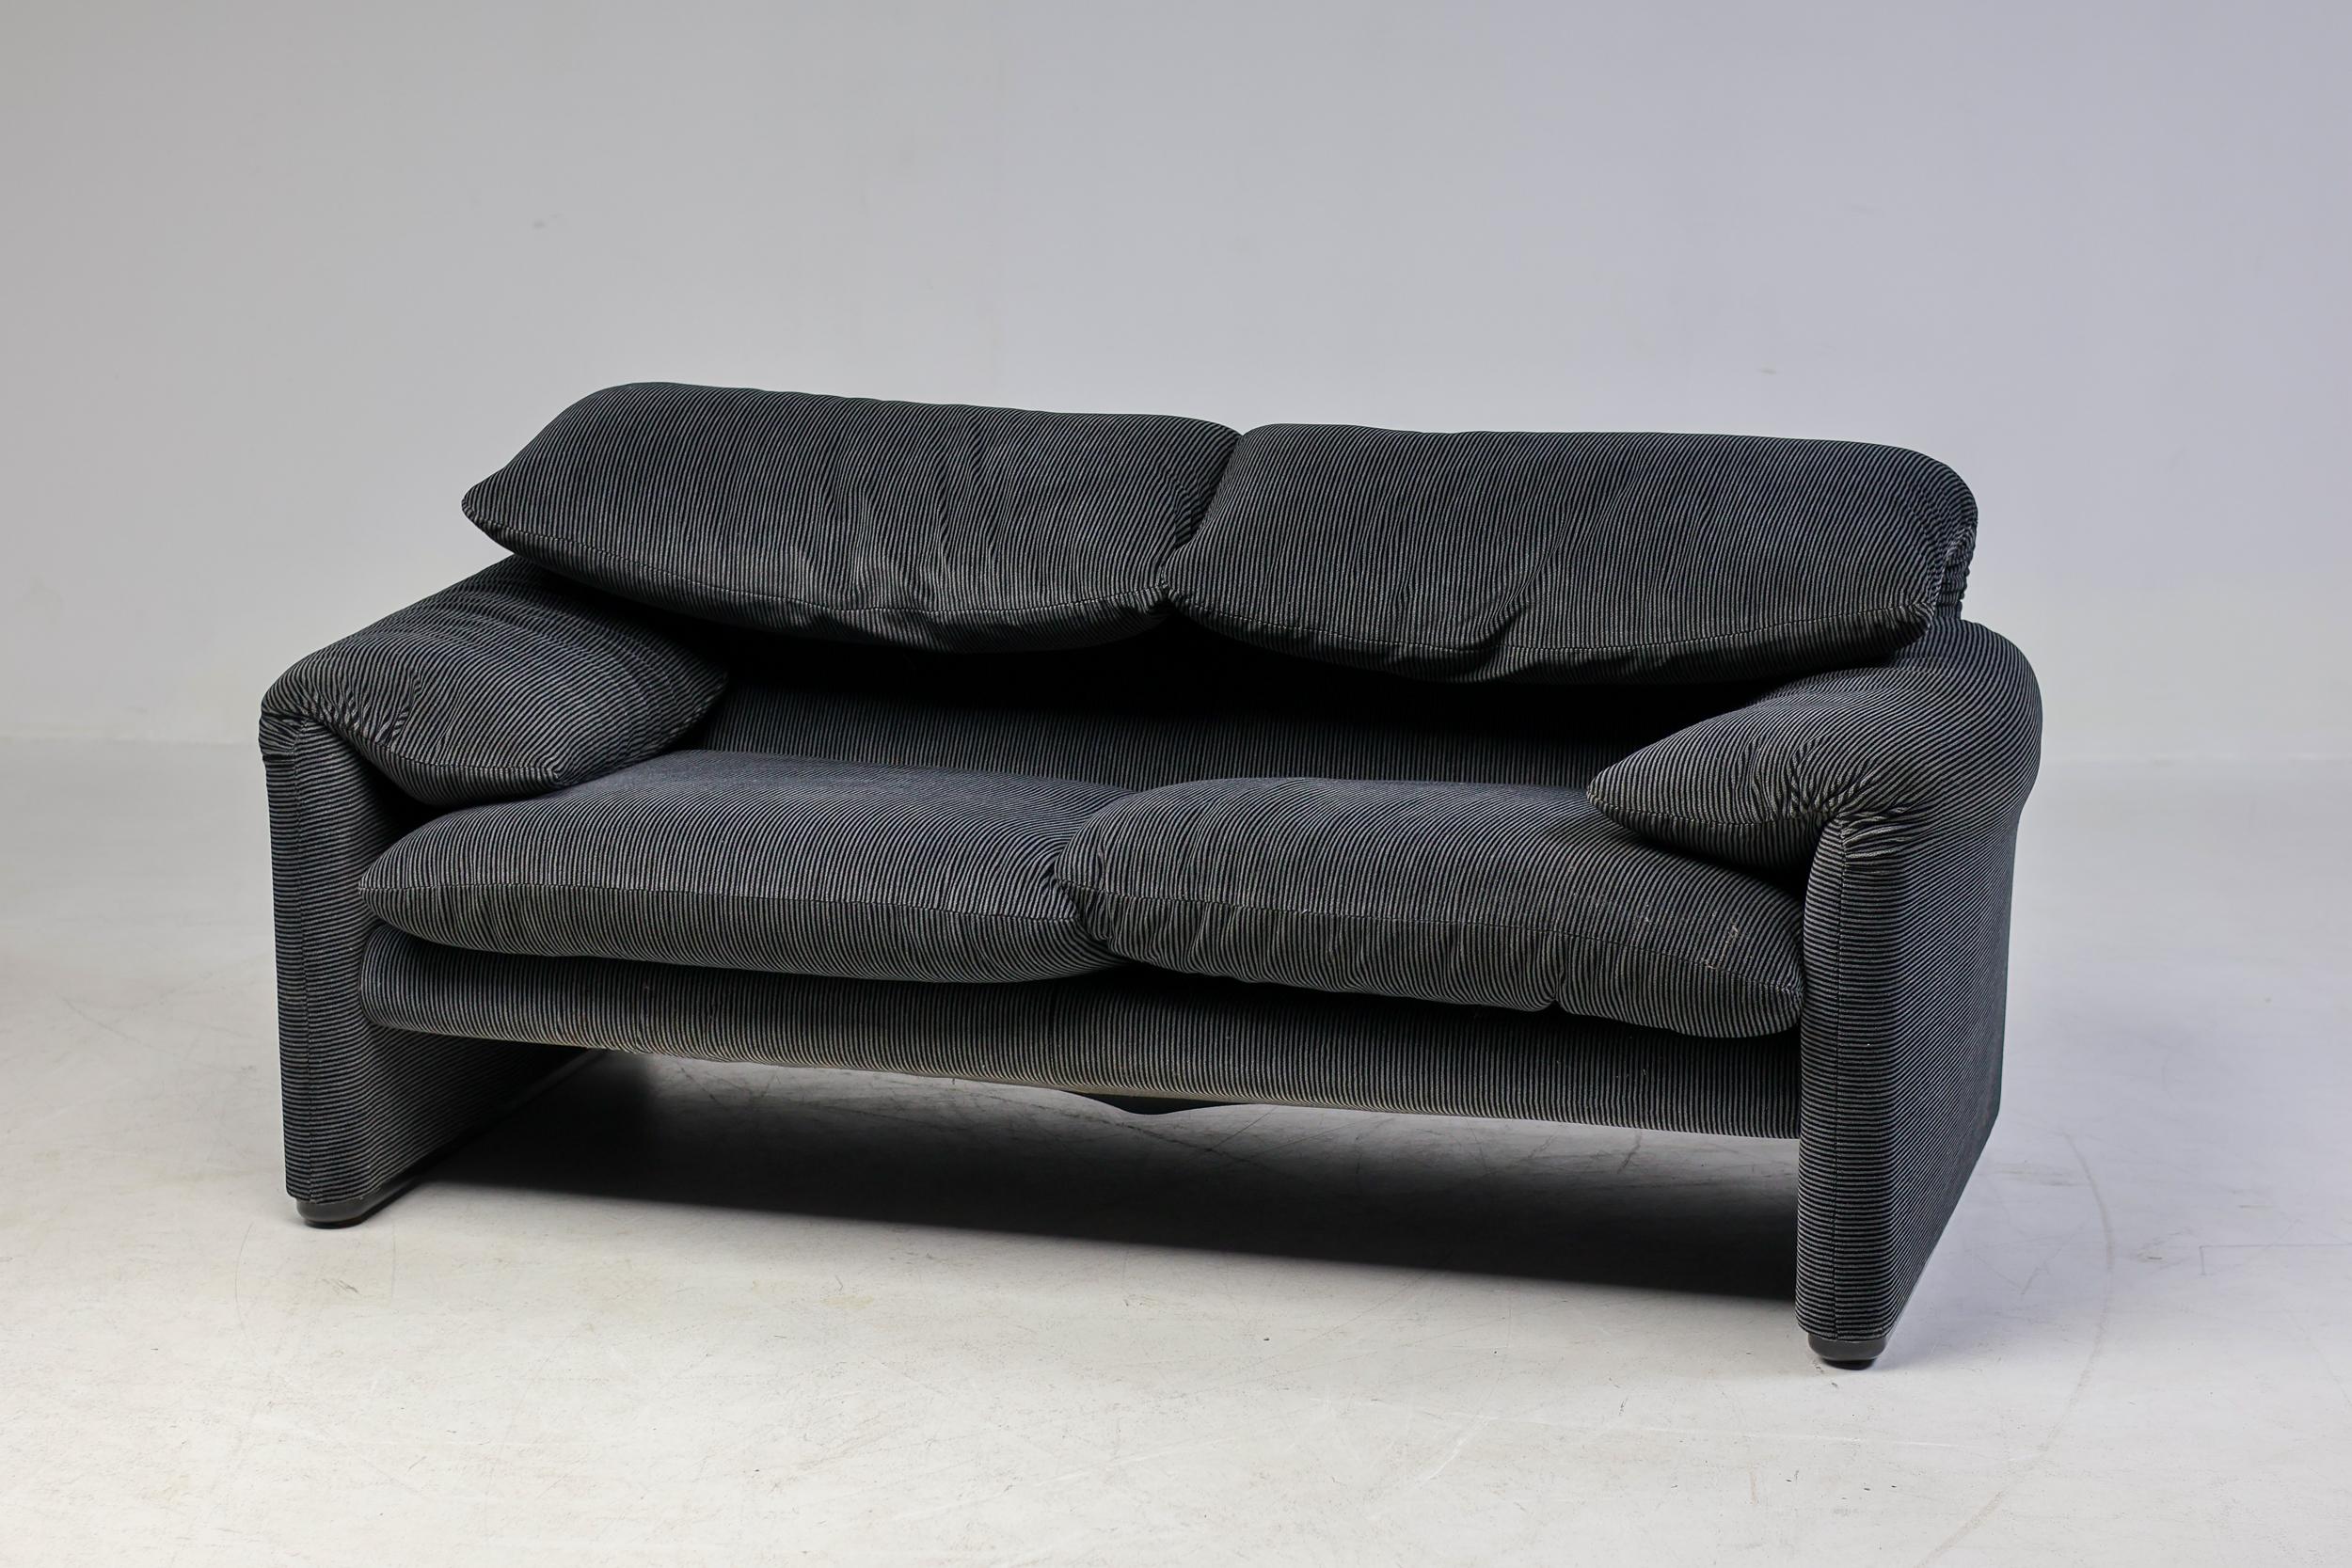 Maralunga 675 Sofa, Armchair and Ottoman by Vico Magistretti for Cassina In Good Condition For Sale In Dronten, NL